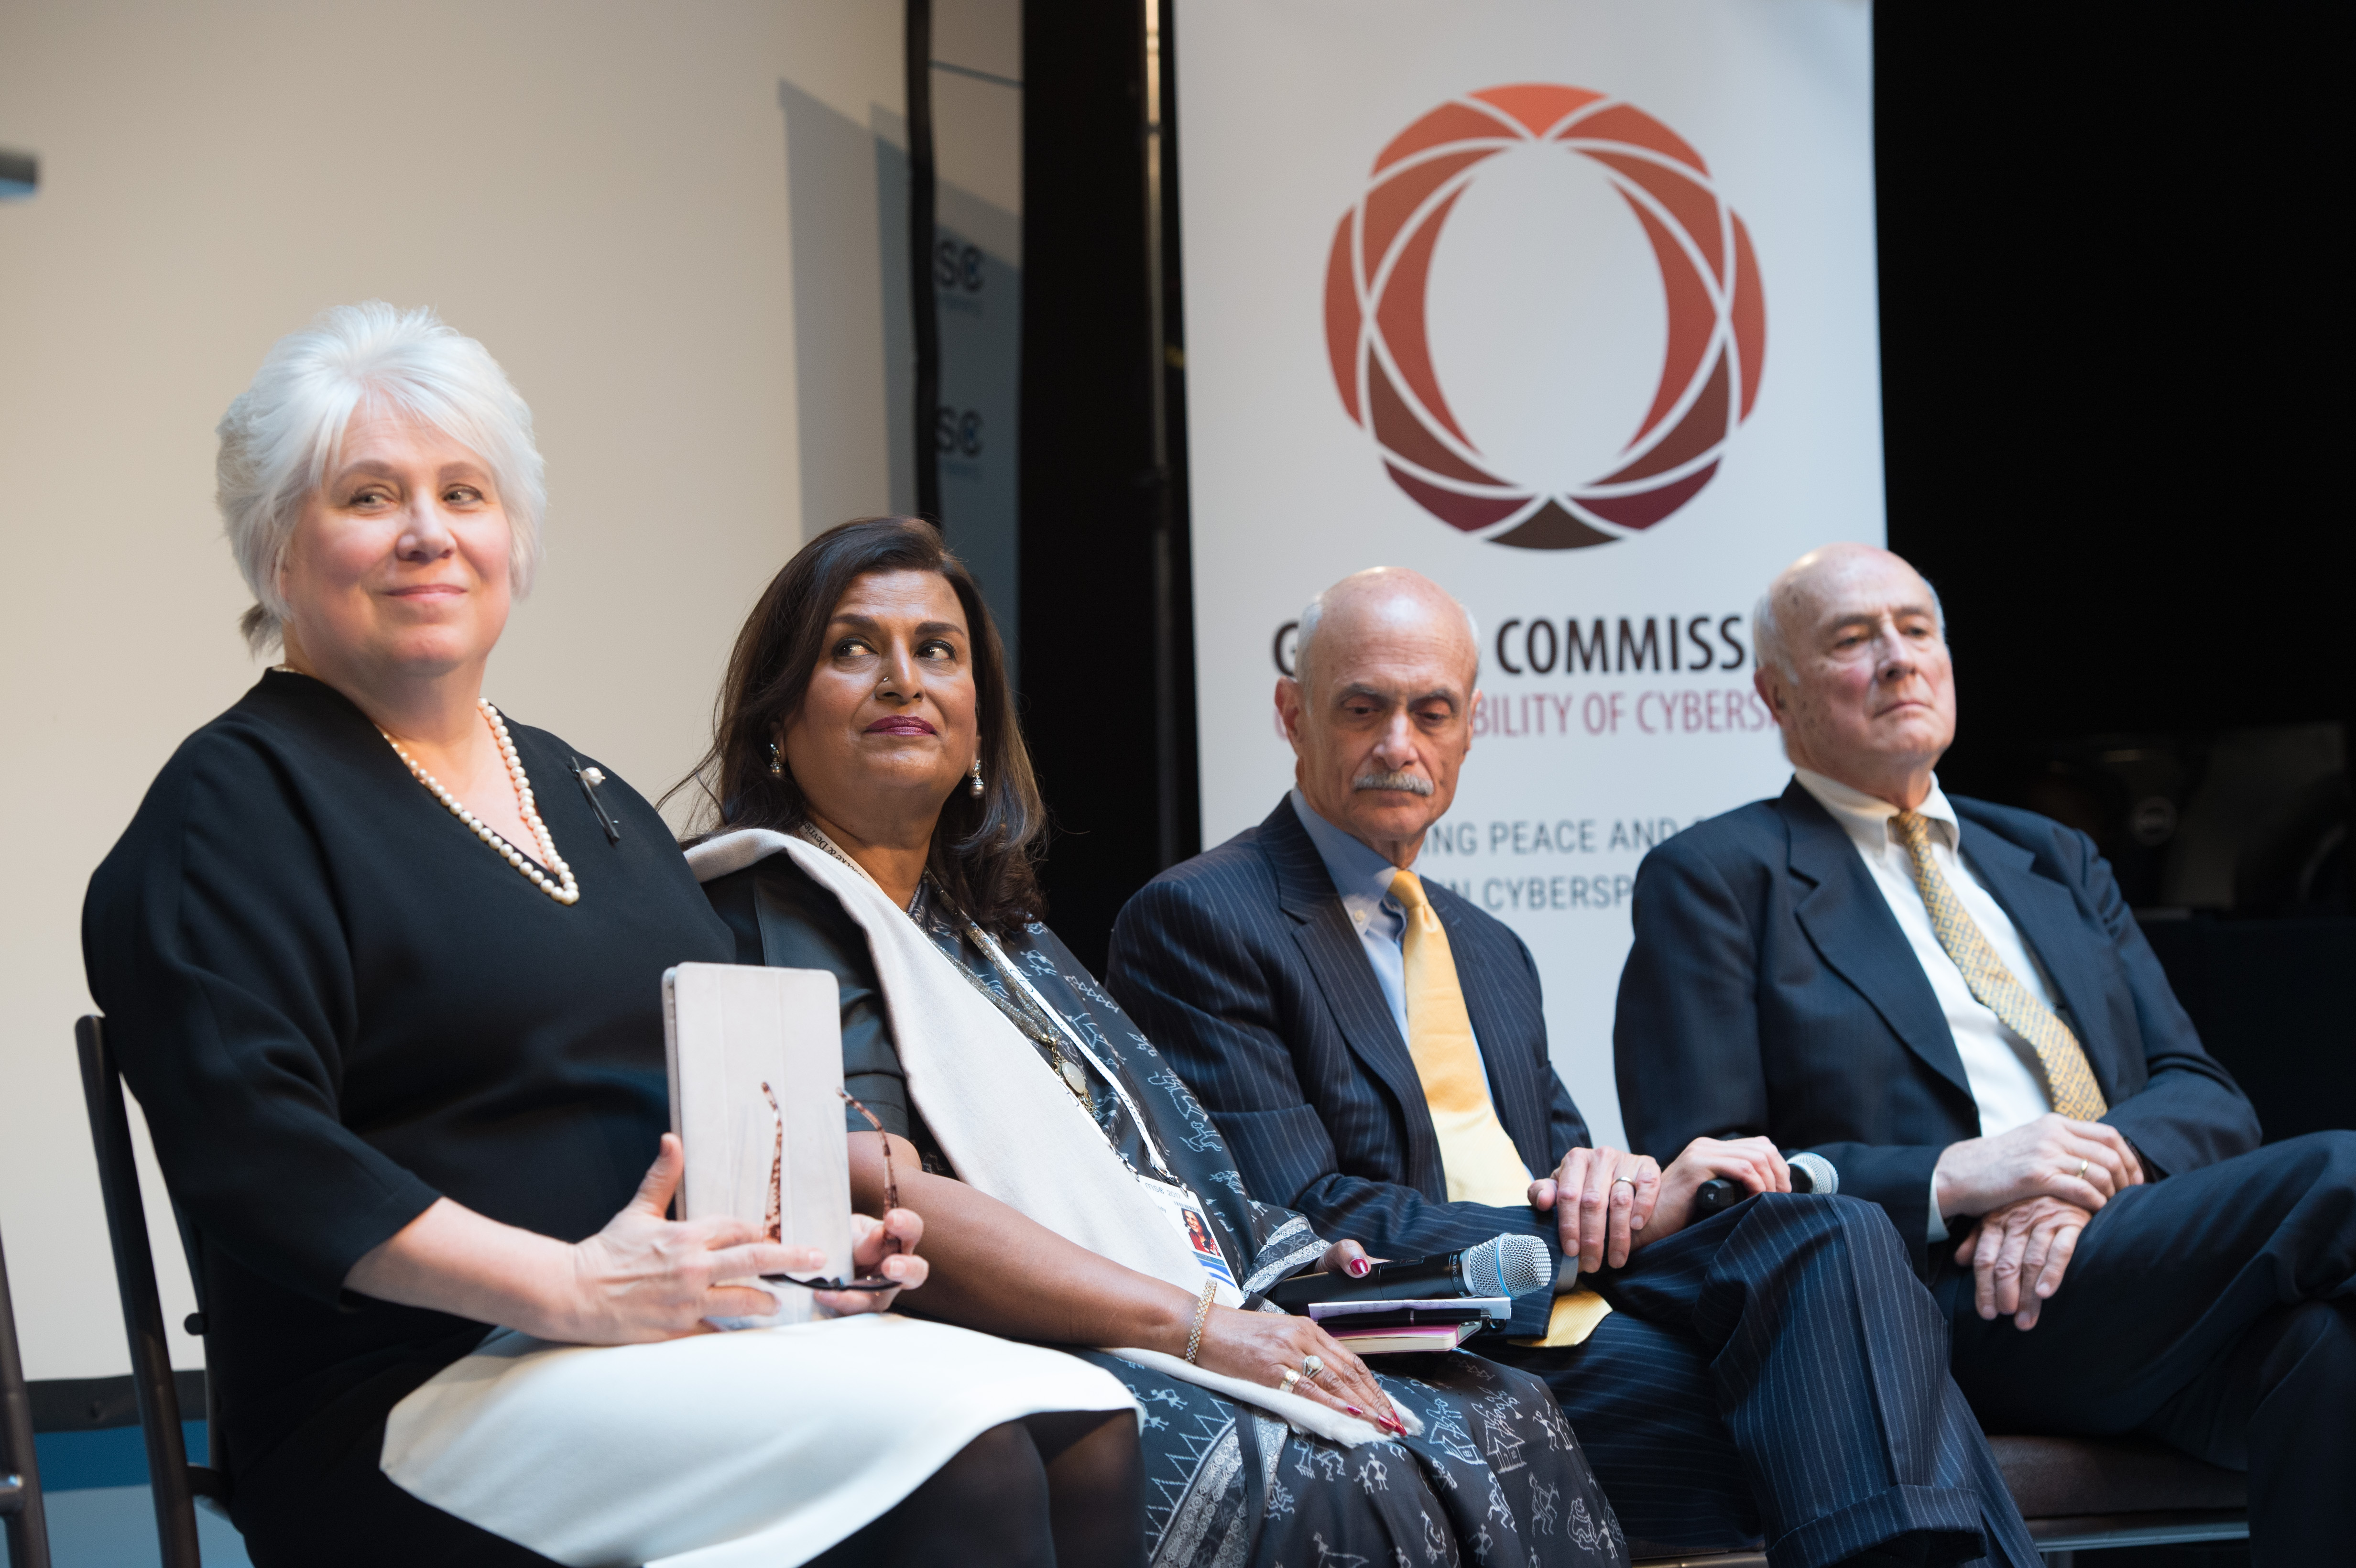 Marina Kaljurand hands over Chairmanship of the Global Commission